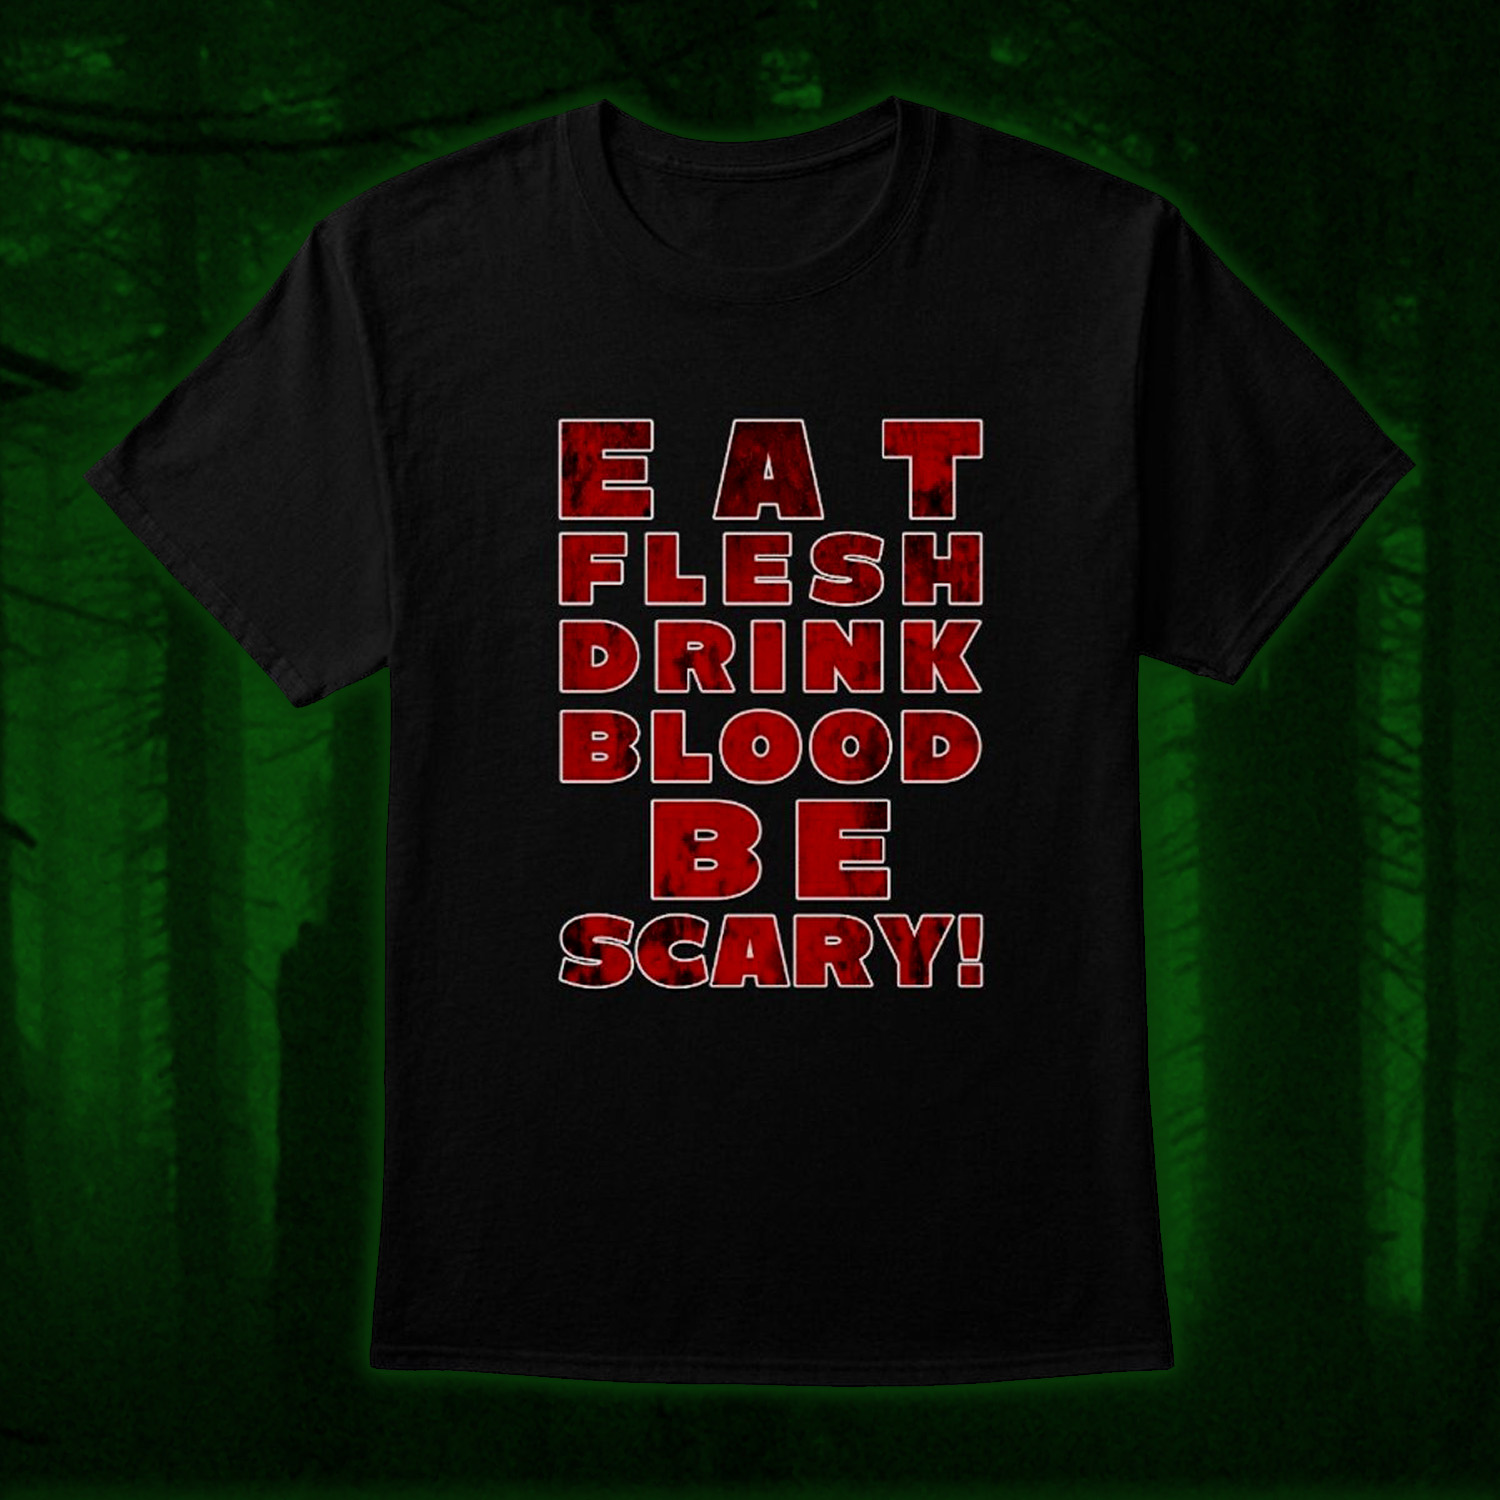 Eat Flesh Drink Blood Be Scary!